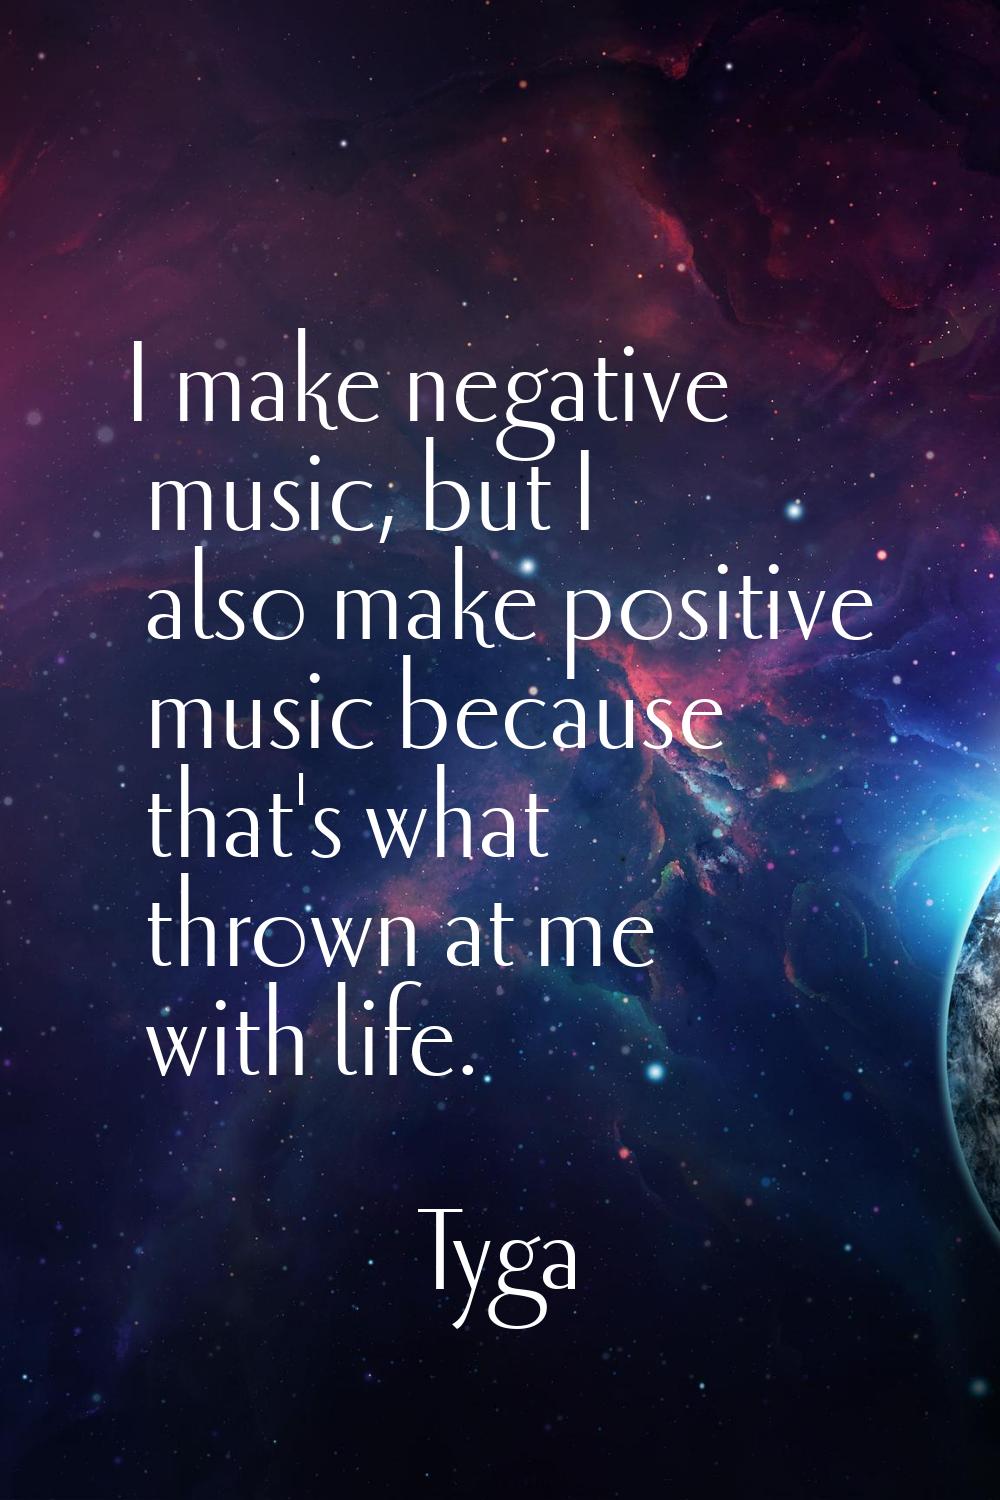 I make negative music, but I also make positive music because that's what thrown at me with life.